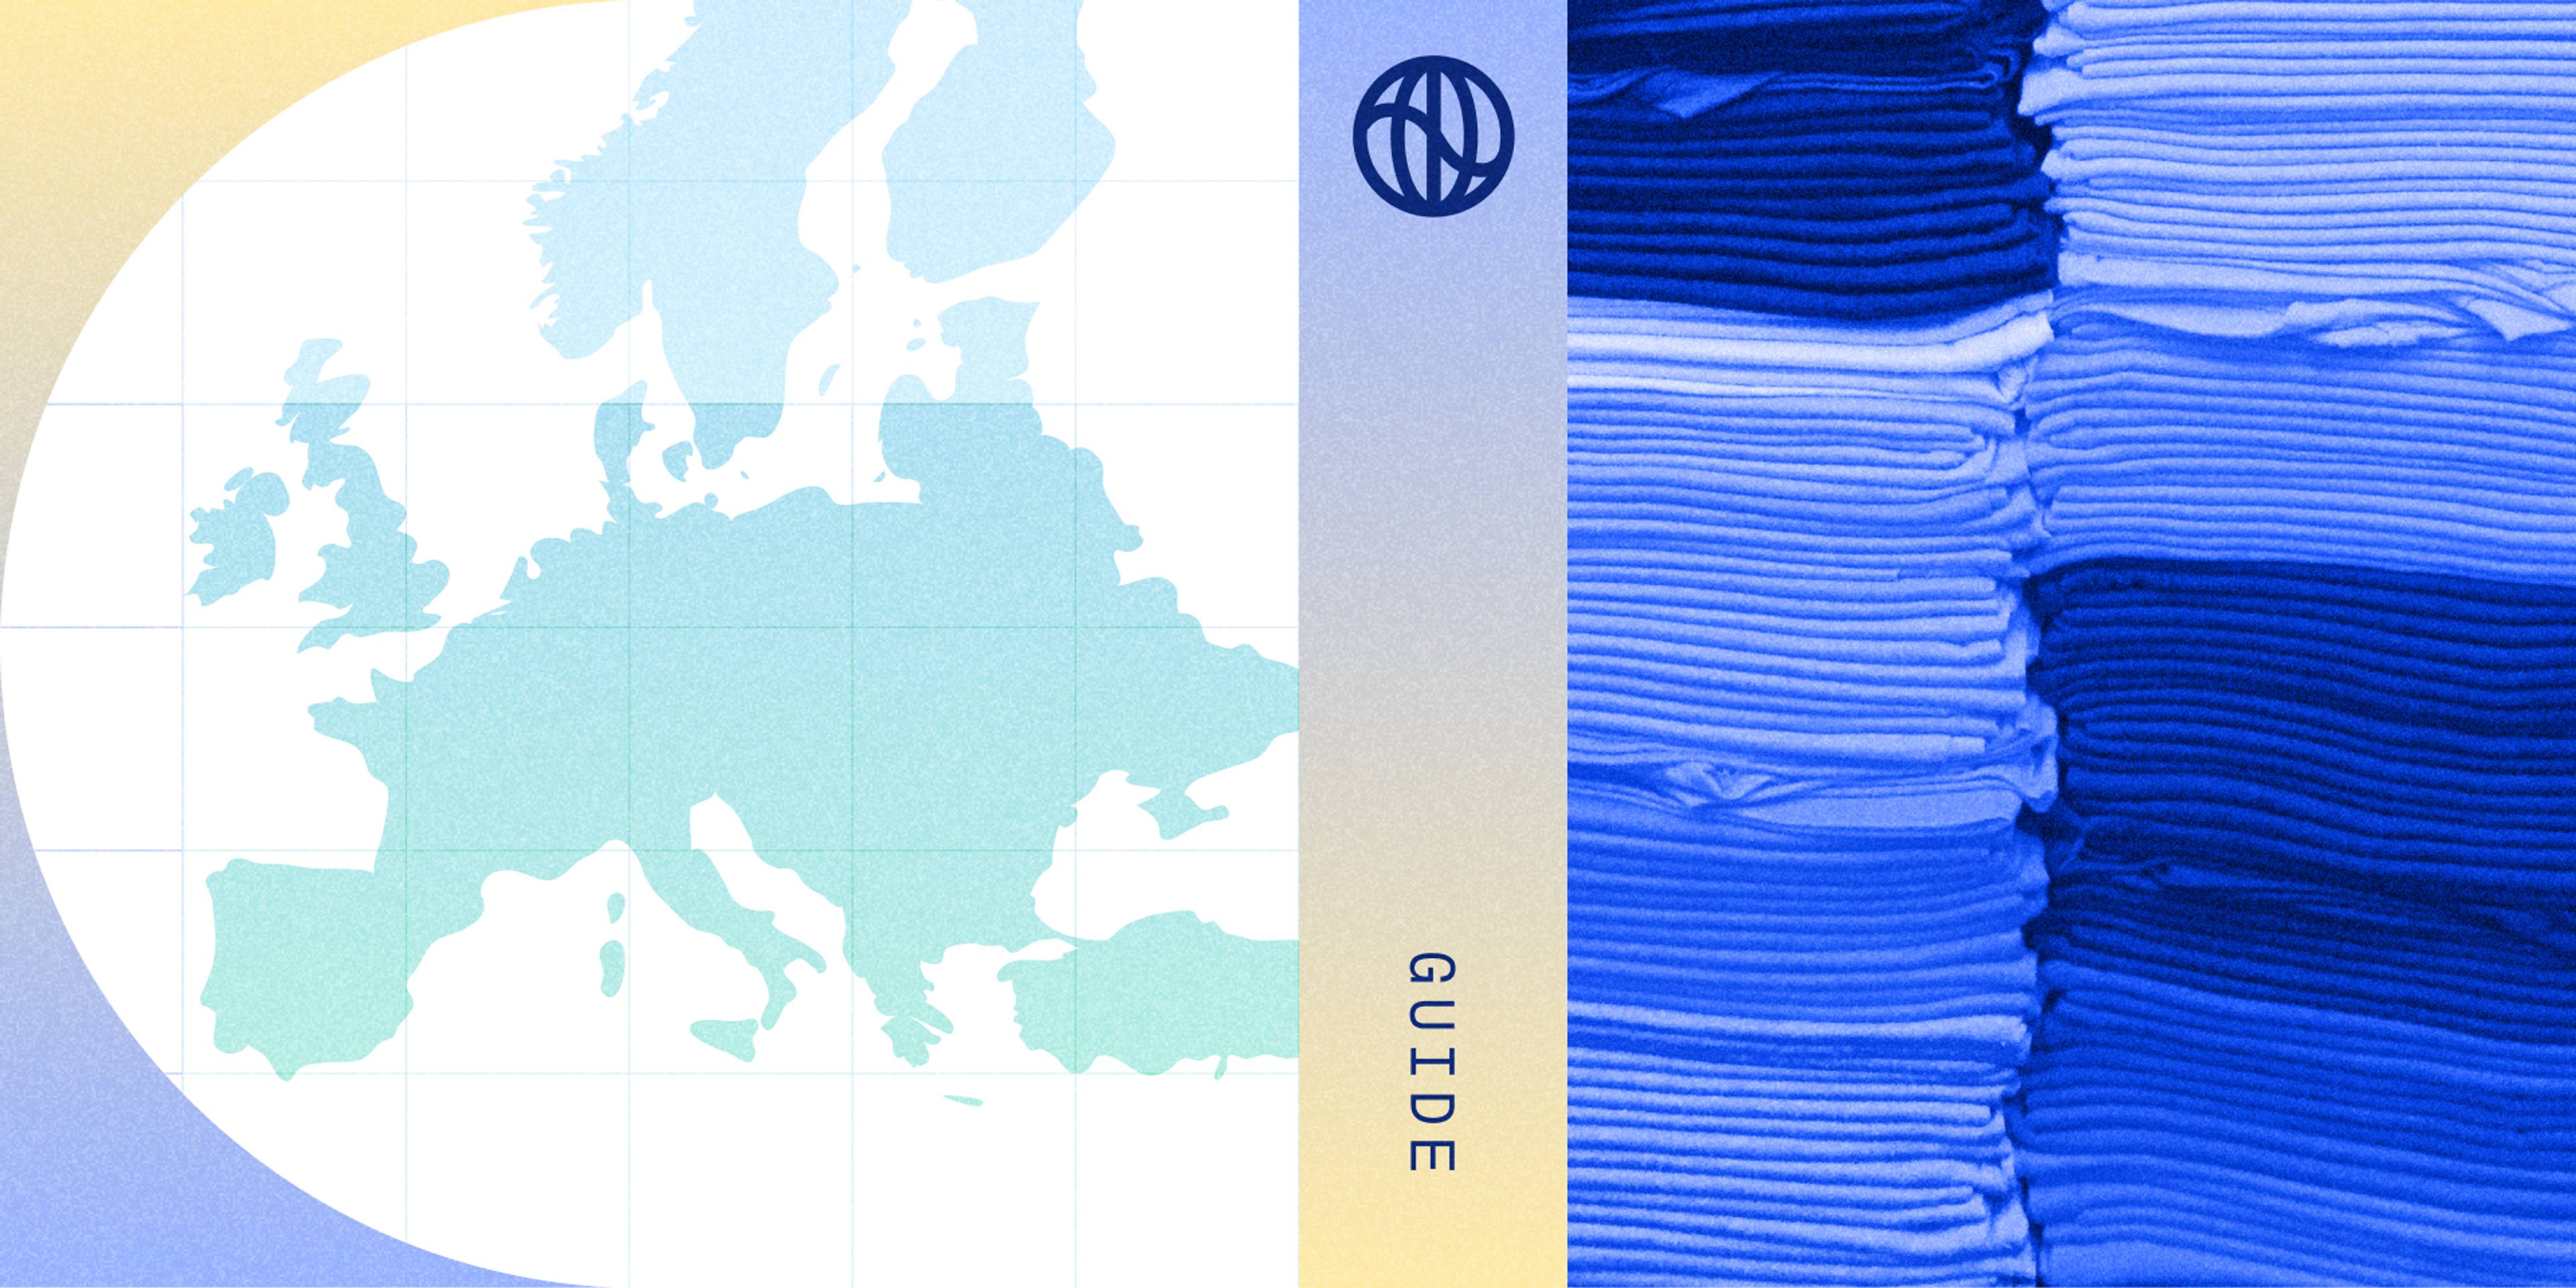 Collage of a vectorized European map and a stack of blue clothing